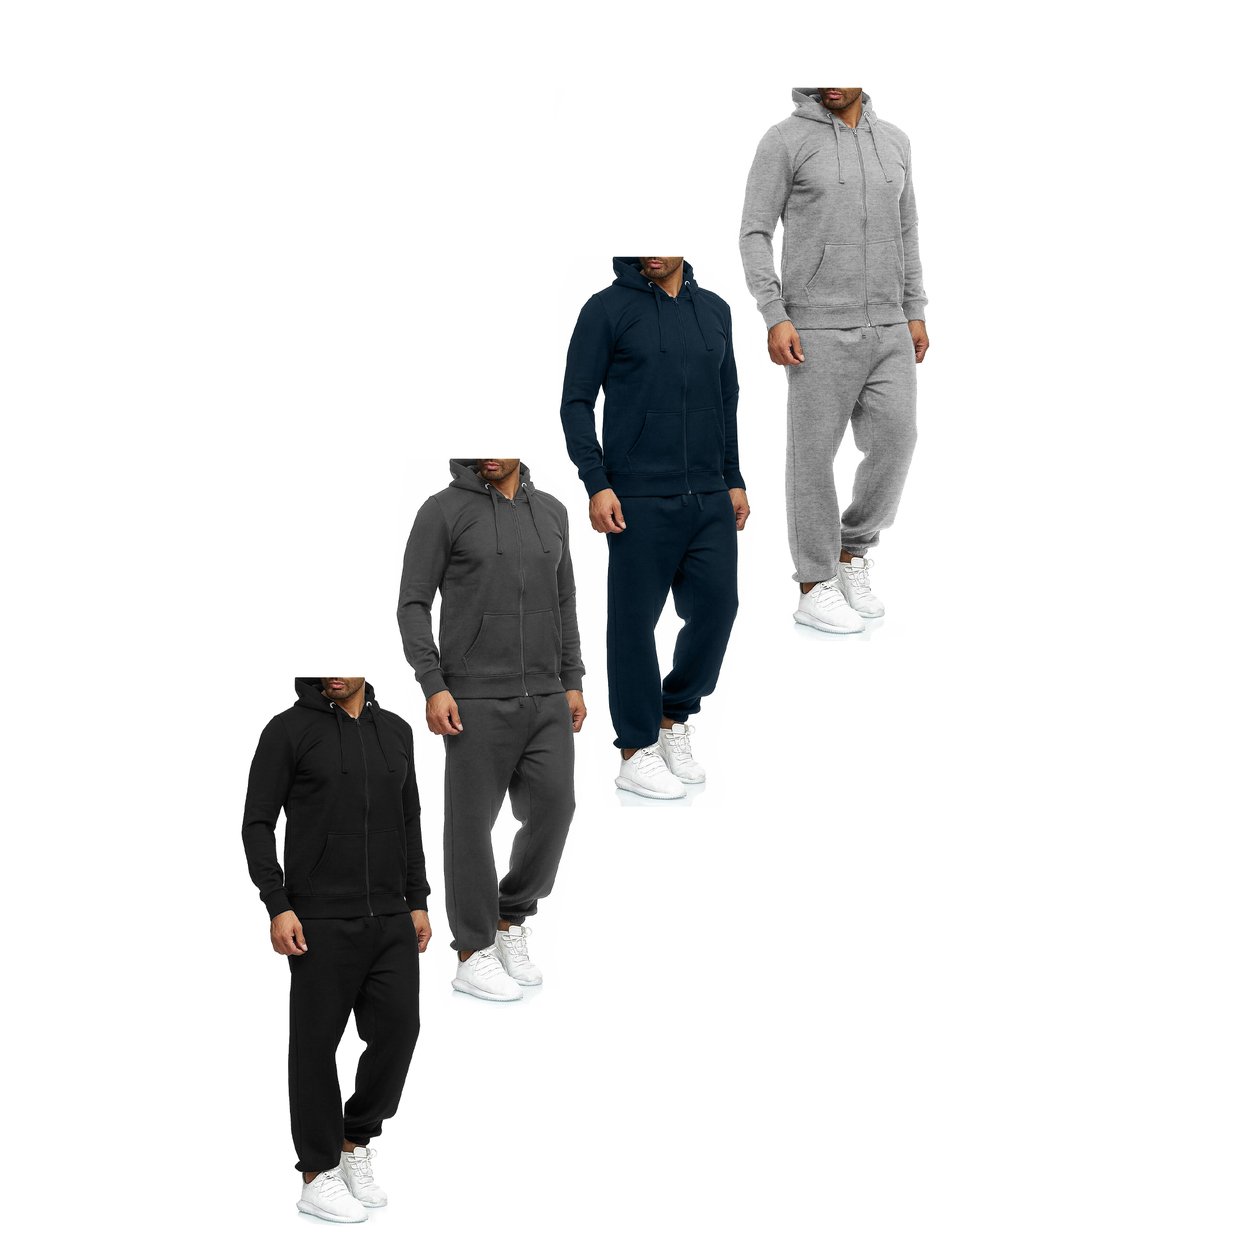 2-Pack: Men's Casual Big & Tall Athletic Active Winter Warm Fleece Lined Full Zip Tracksuit Jogger Set - Charcoal, 3xl